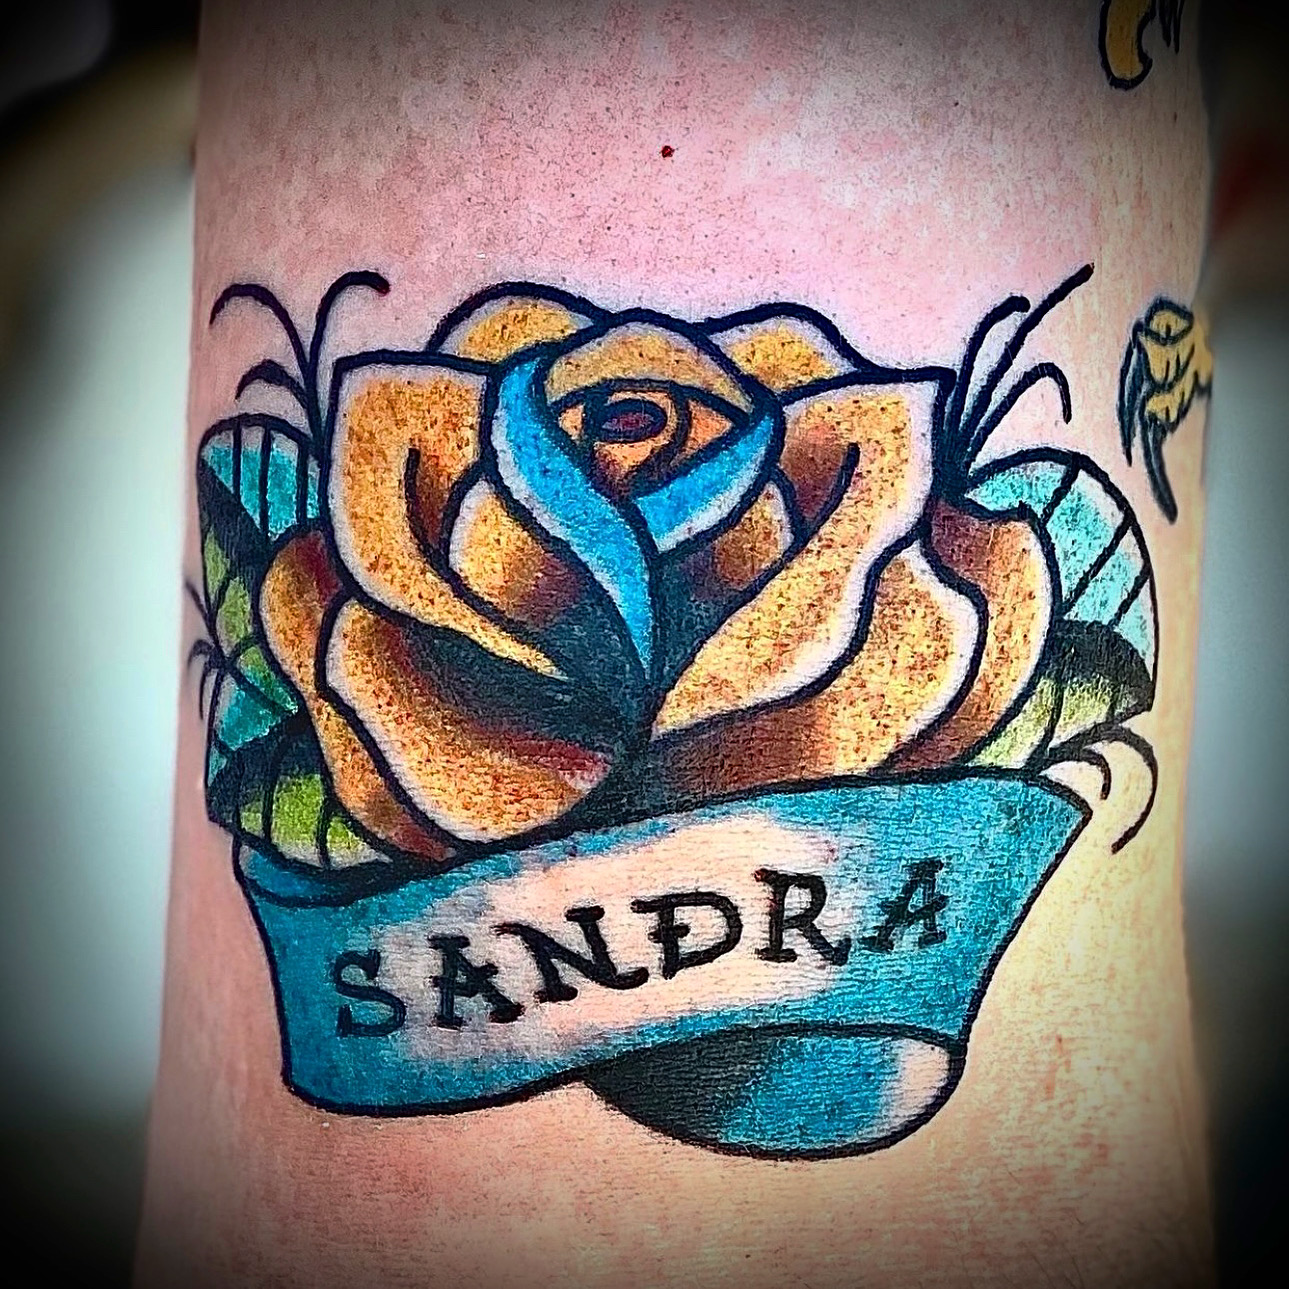 Tattoo of a name and flower from Dallas Tattoo artist